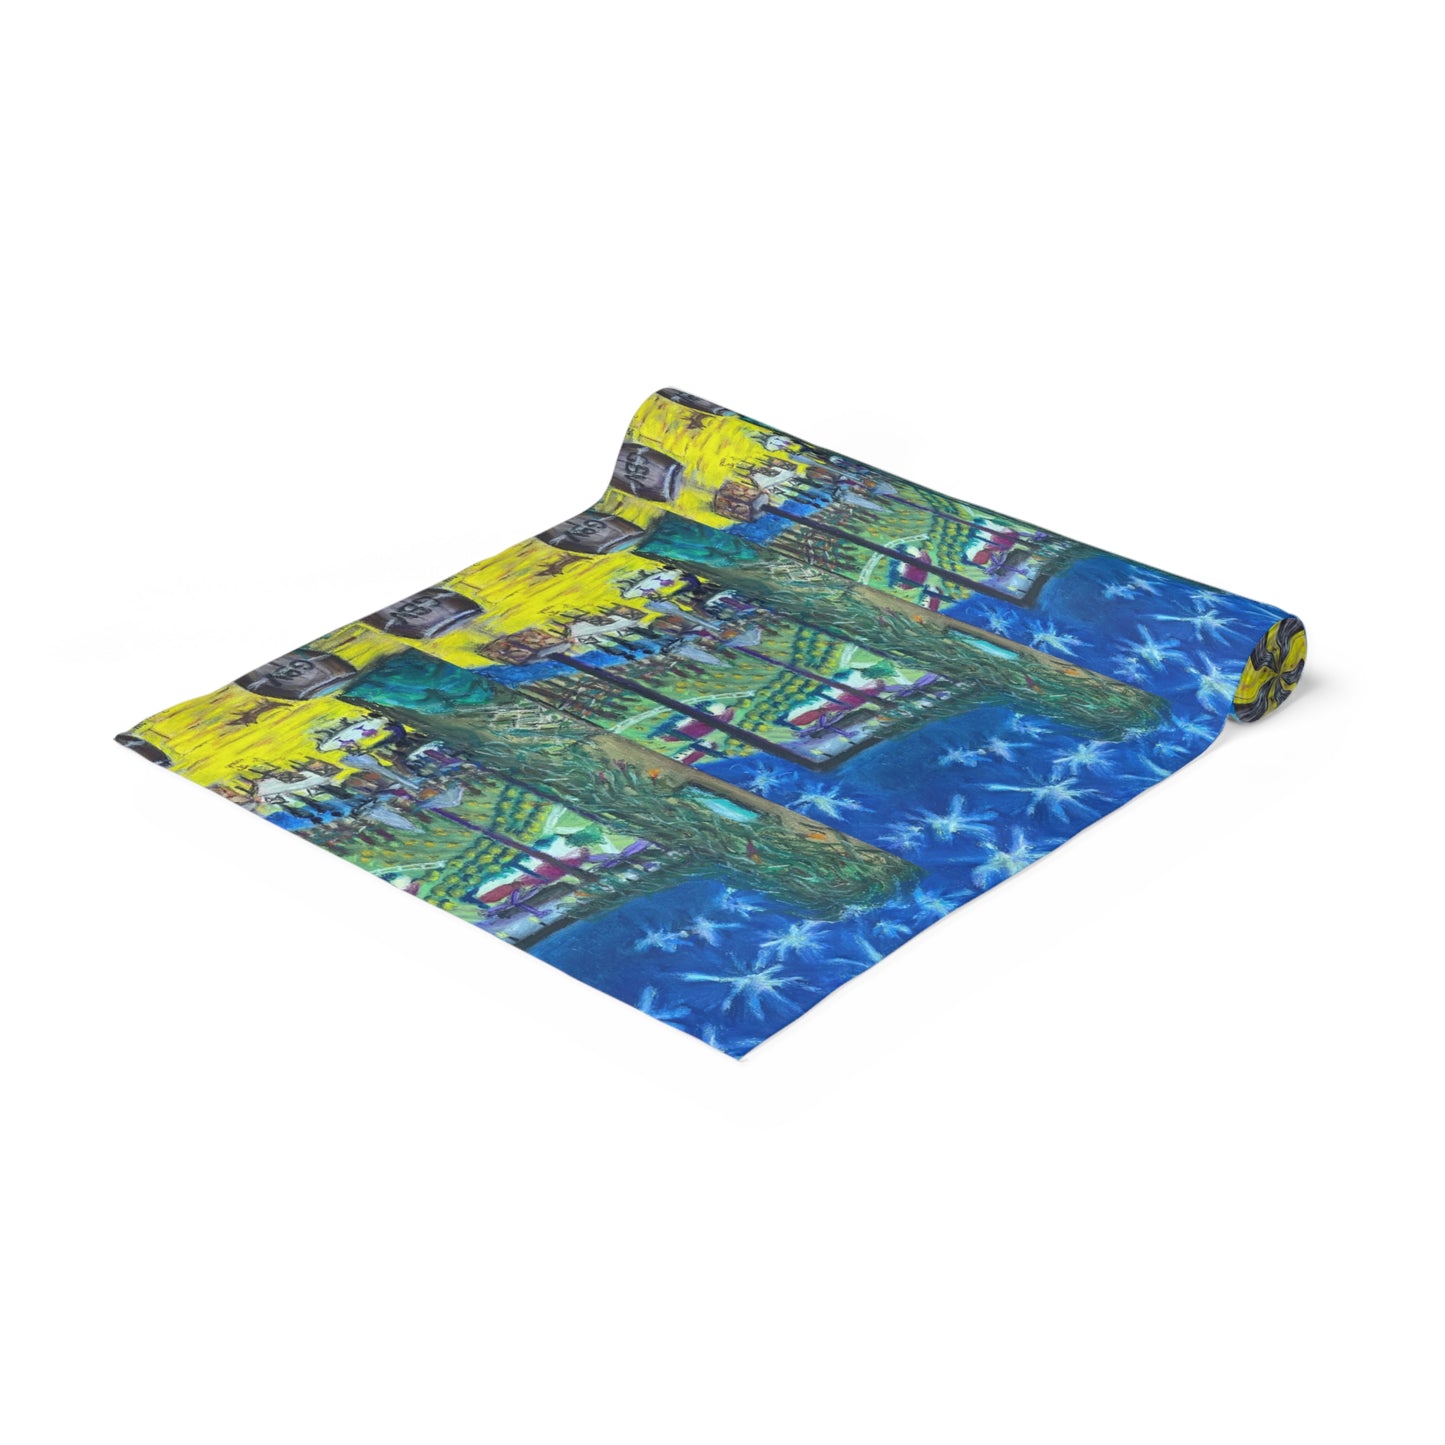 Twilight in Temecula-GBV- Table Runner